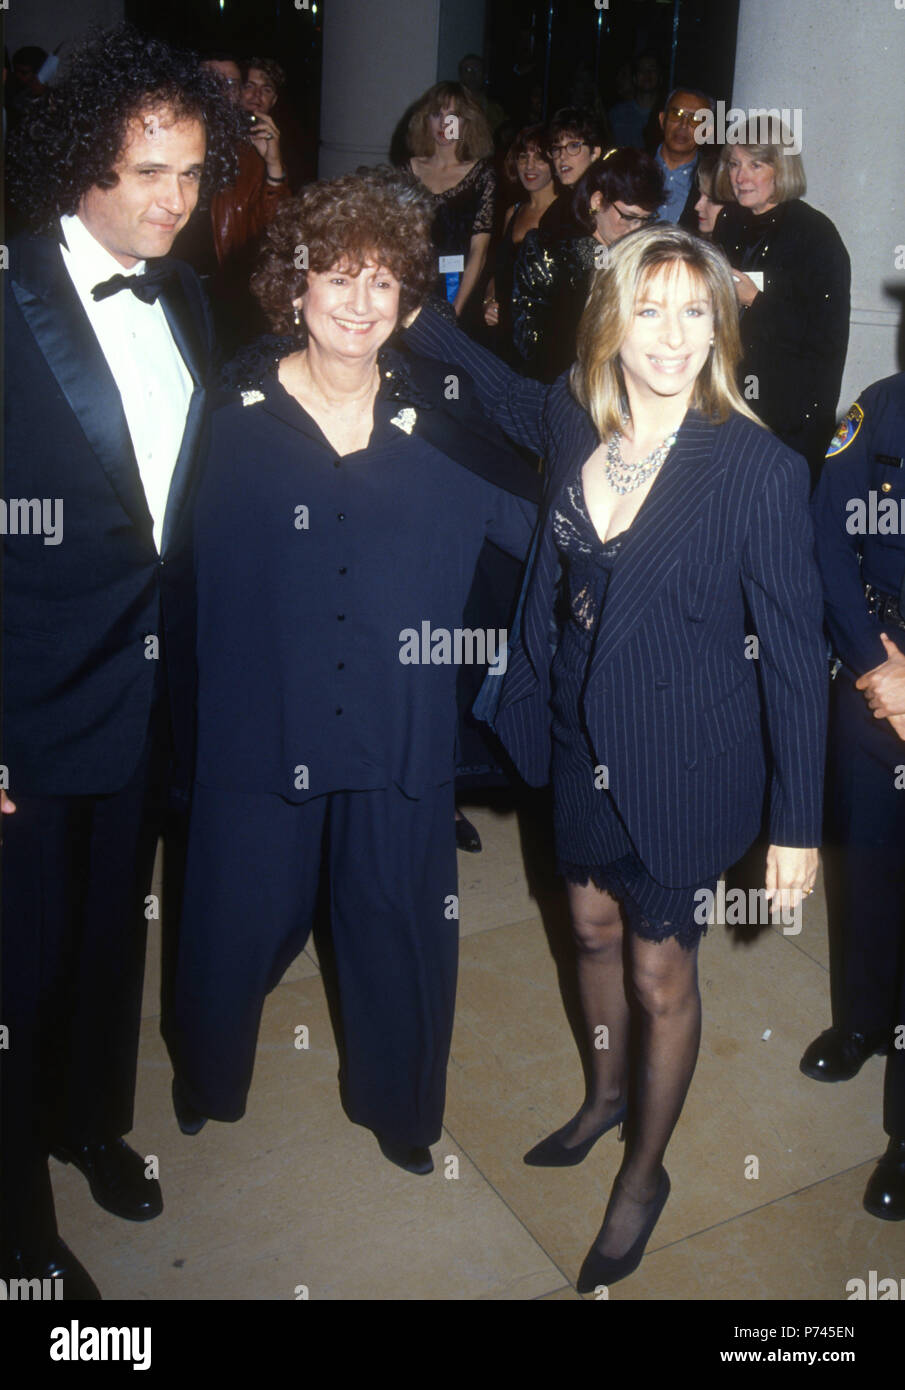 BEVERLY HILLS, CA - JANUARY 18: (L-R) Composer Richard Baskin, guest and Singer/actress Barbra Streisand attend the 49th Annual Golden Globe Awards on January 19, 1992 at the Beverly Hilton Hotel in Beverly Hills, California. Photo by Barry King/Alamy Stock Photo Stock Photo